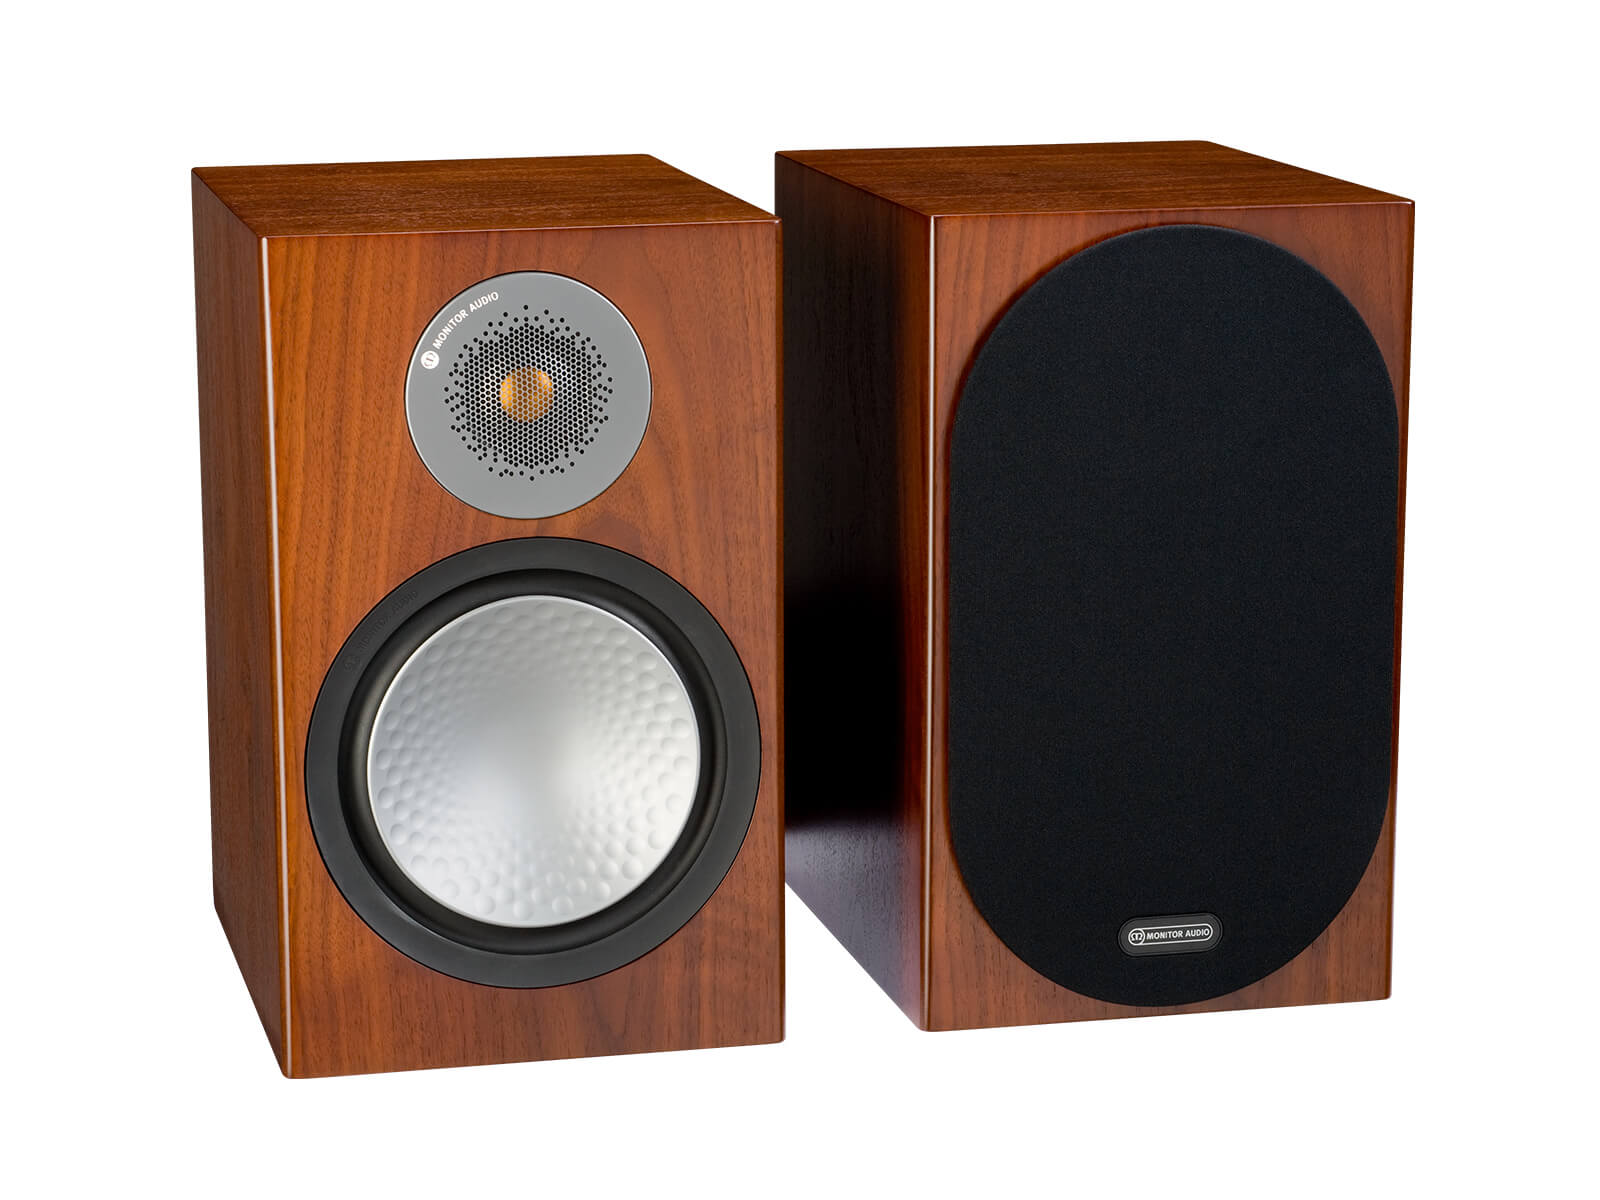 Silver 100, bookshelf speakers, with and without grille in a walnut finish.